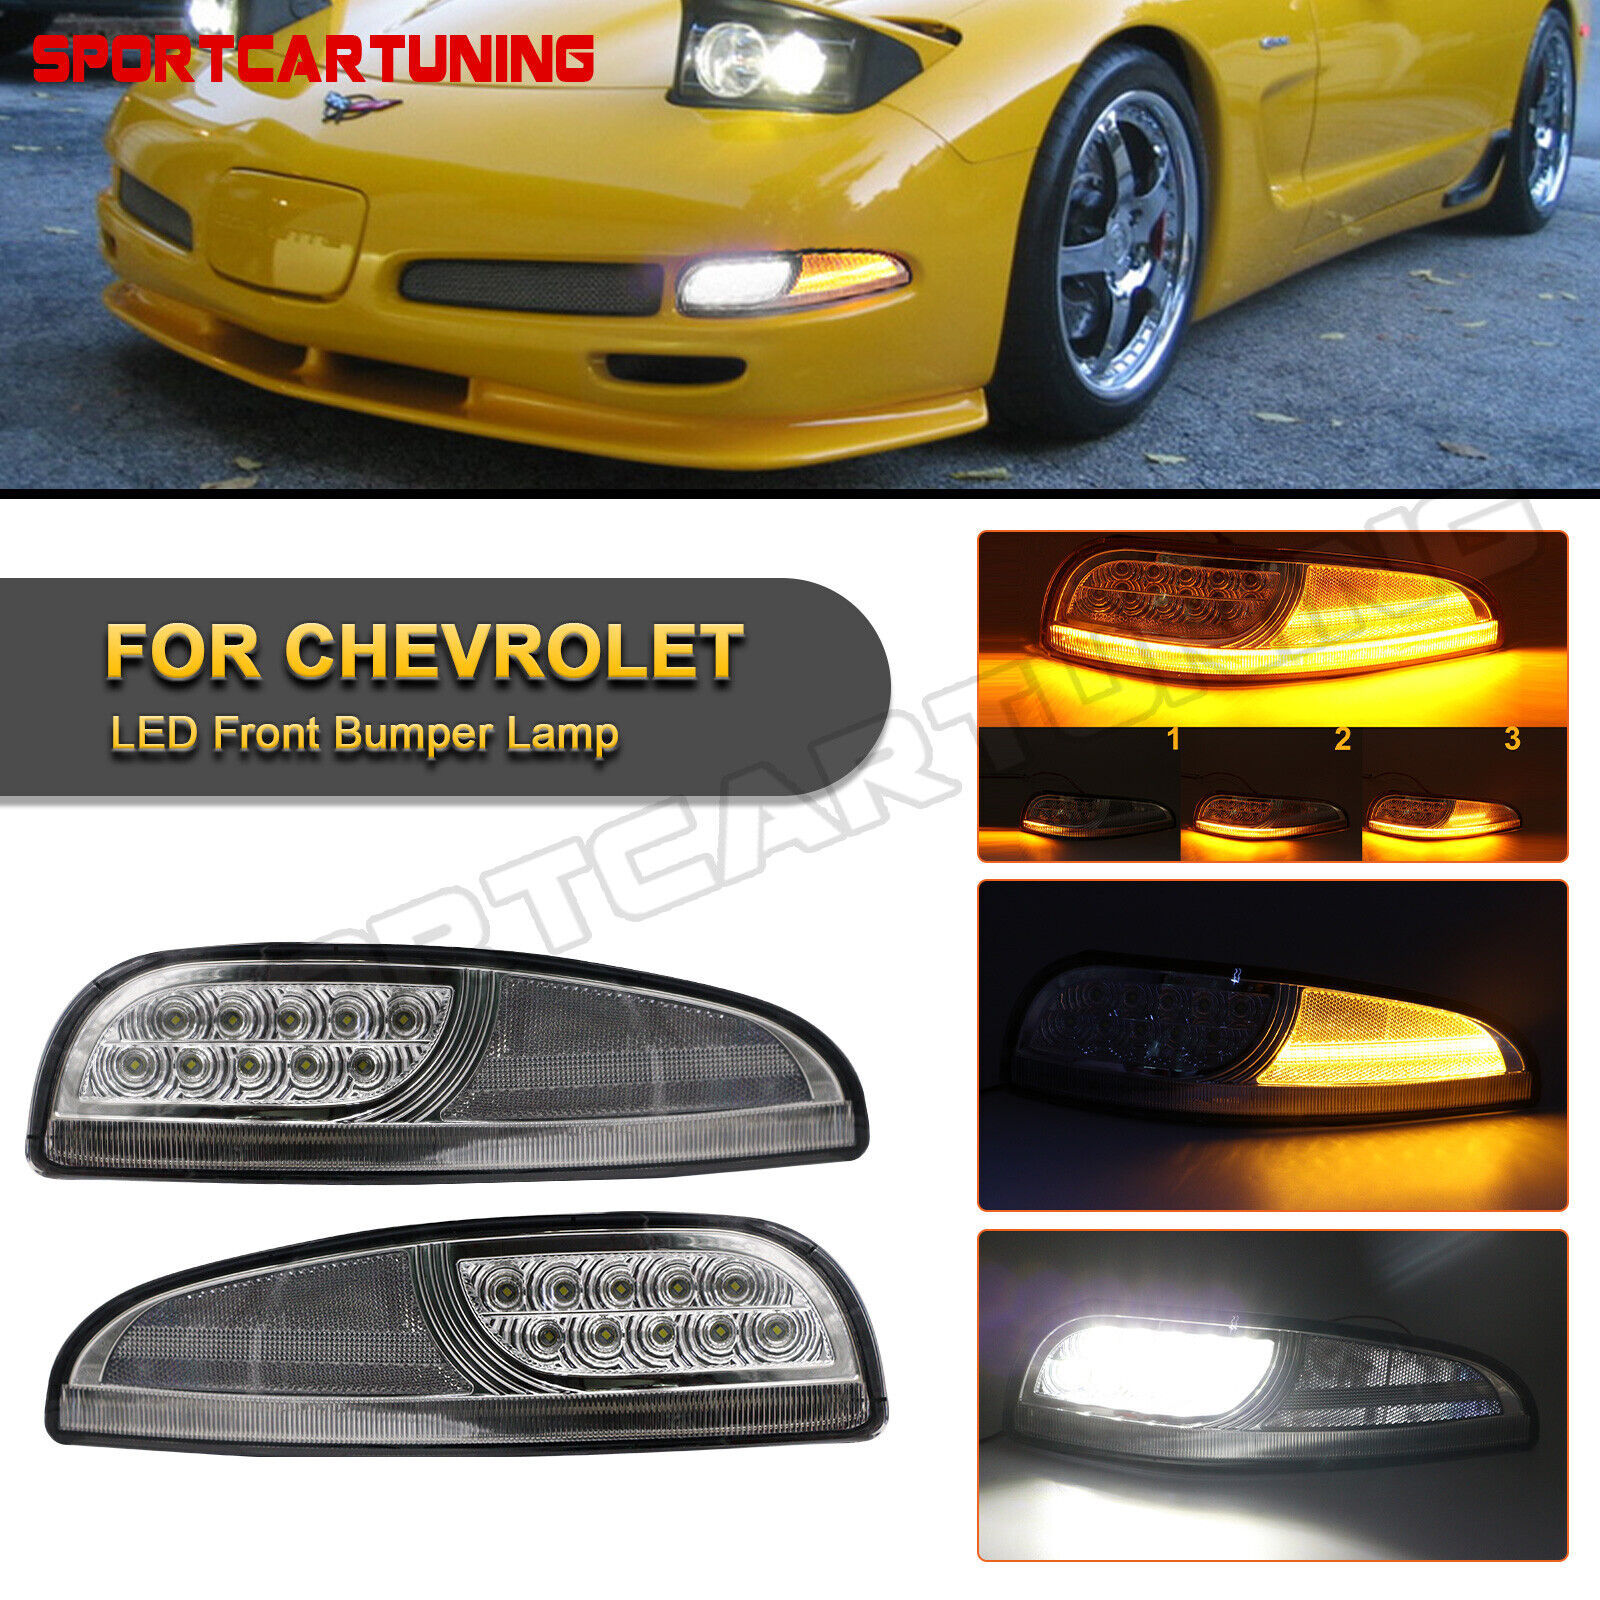 Sequential LED Bumper Signal Parking Lights Lamp For 1997-2004 Chevy Corvette C5